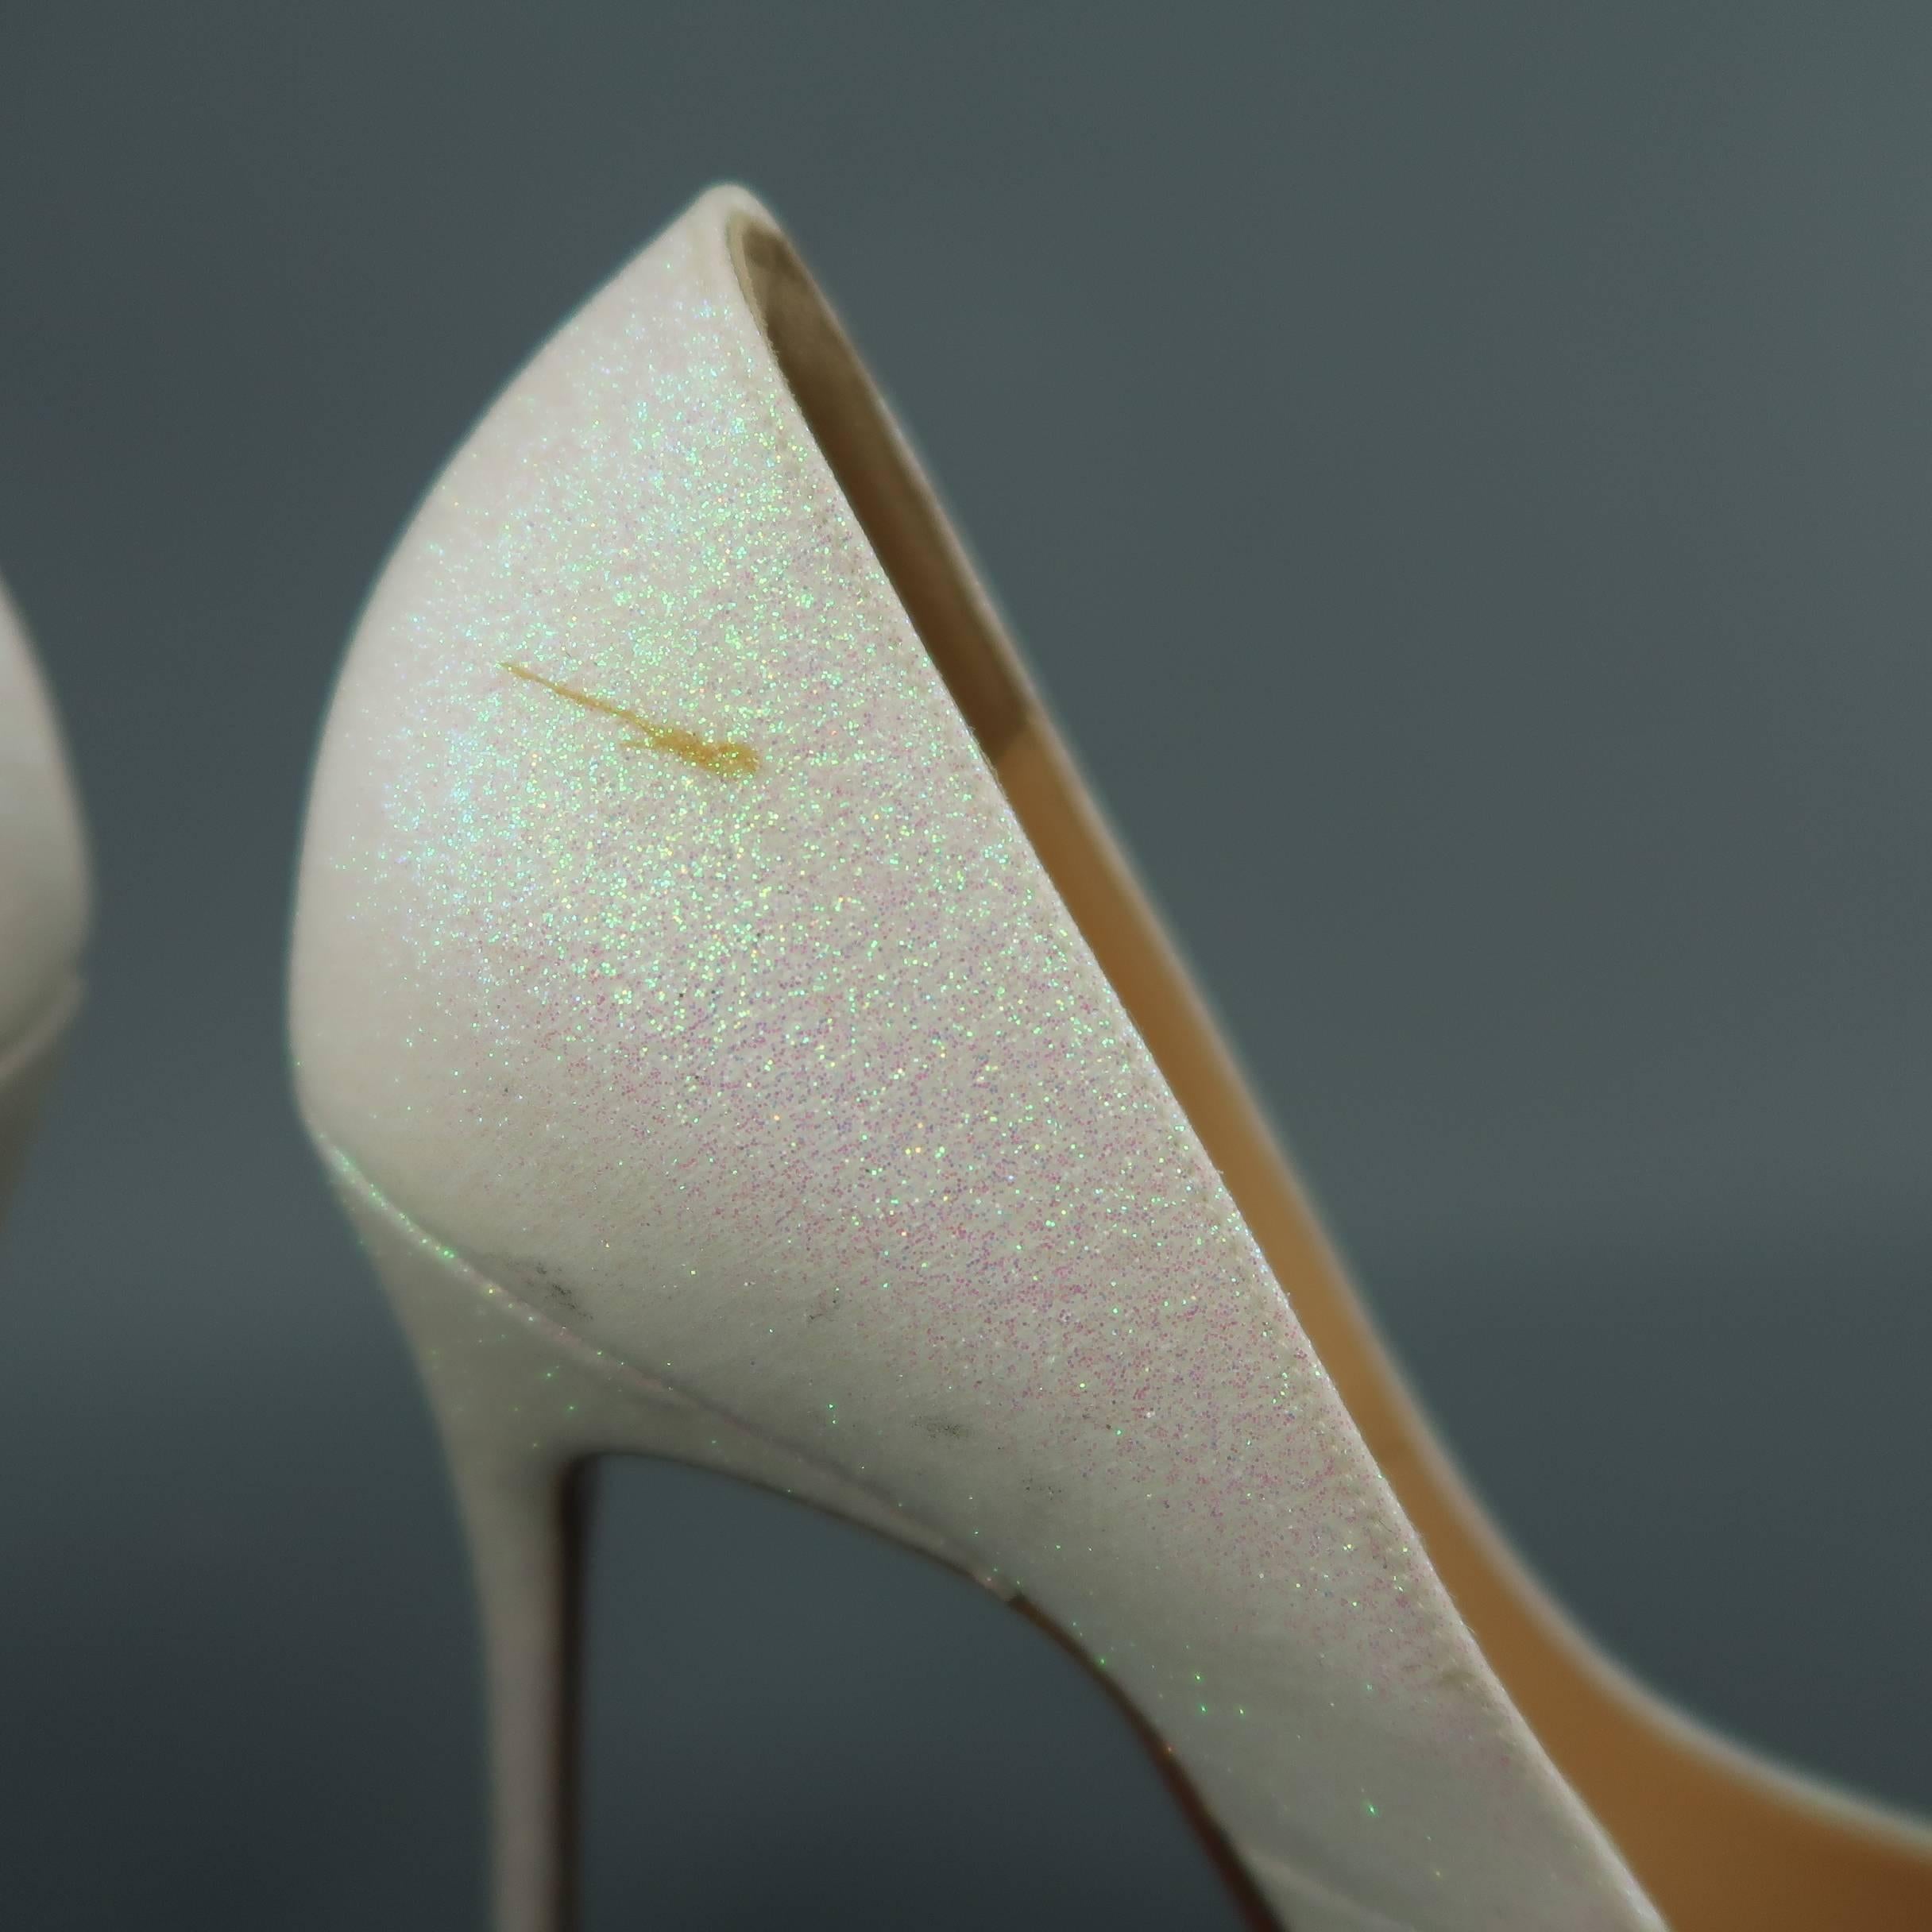 Beige CHRISTIAN LOUBOUTIN 9 Ivory Iridescent Glitter Leather Pigalle Follies Pumps